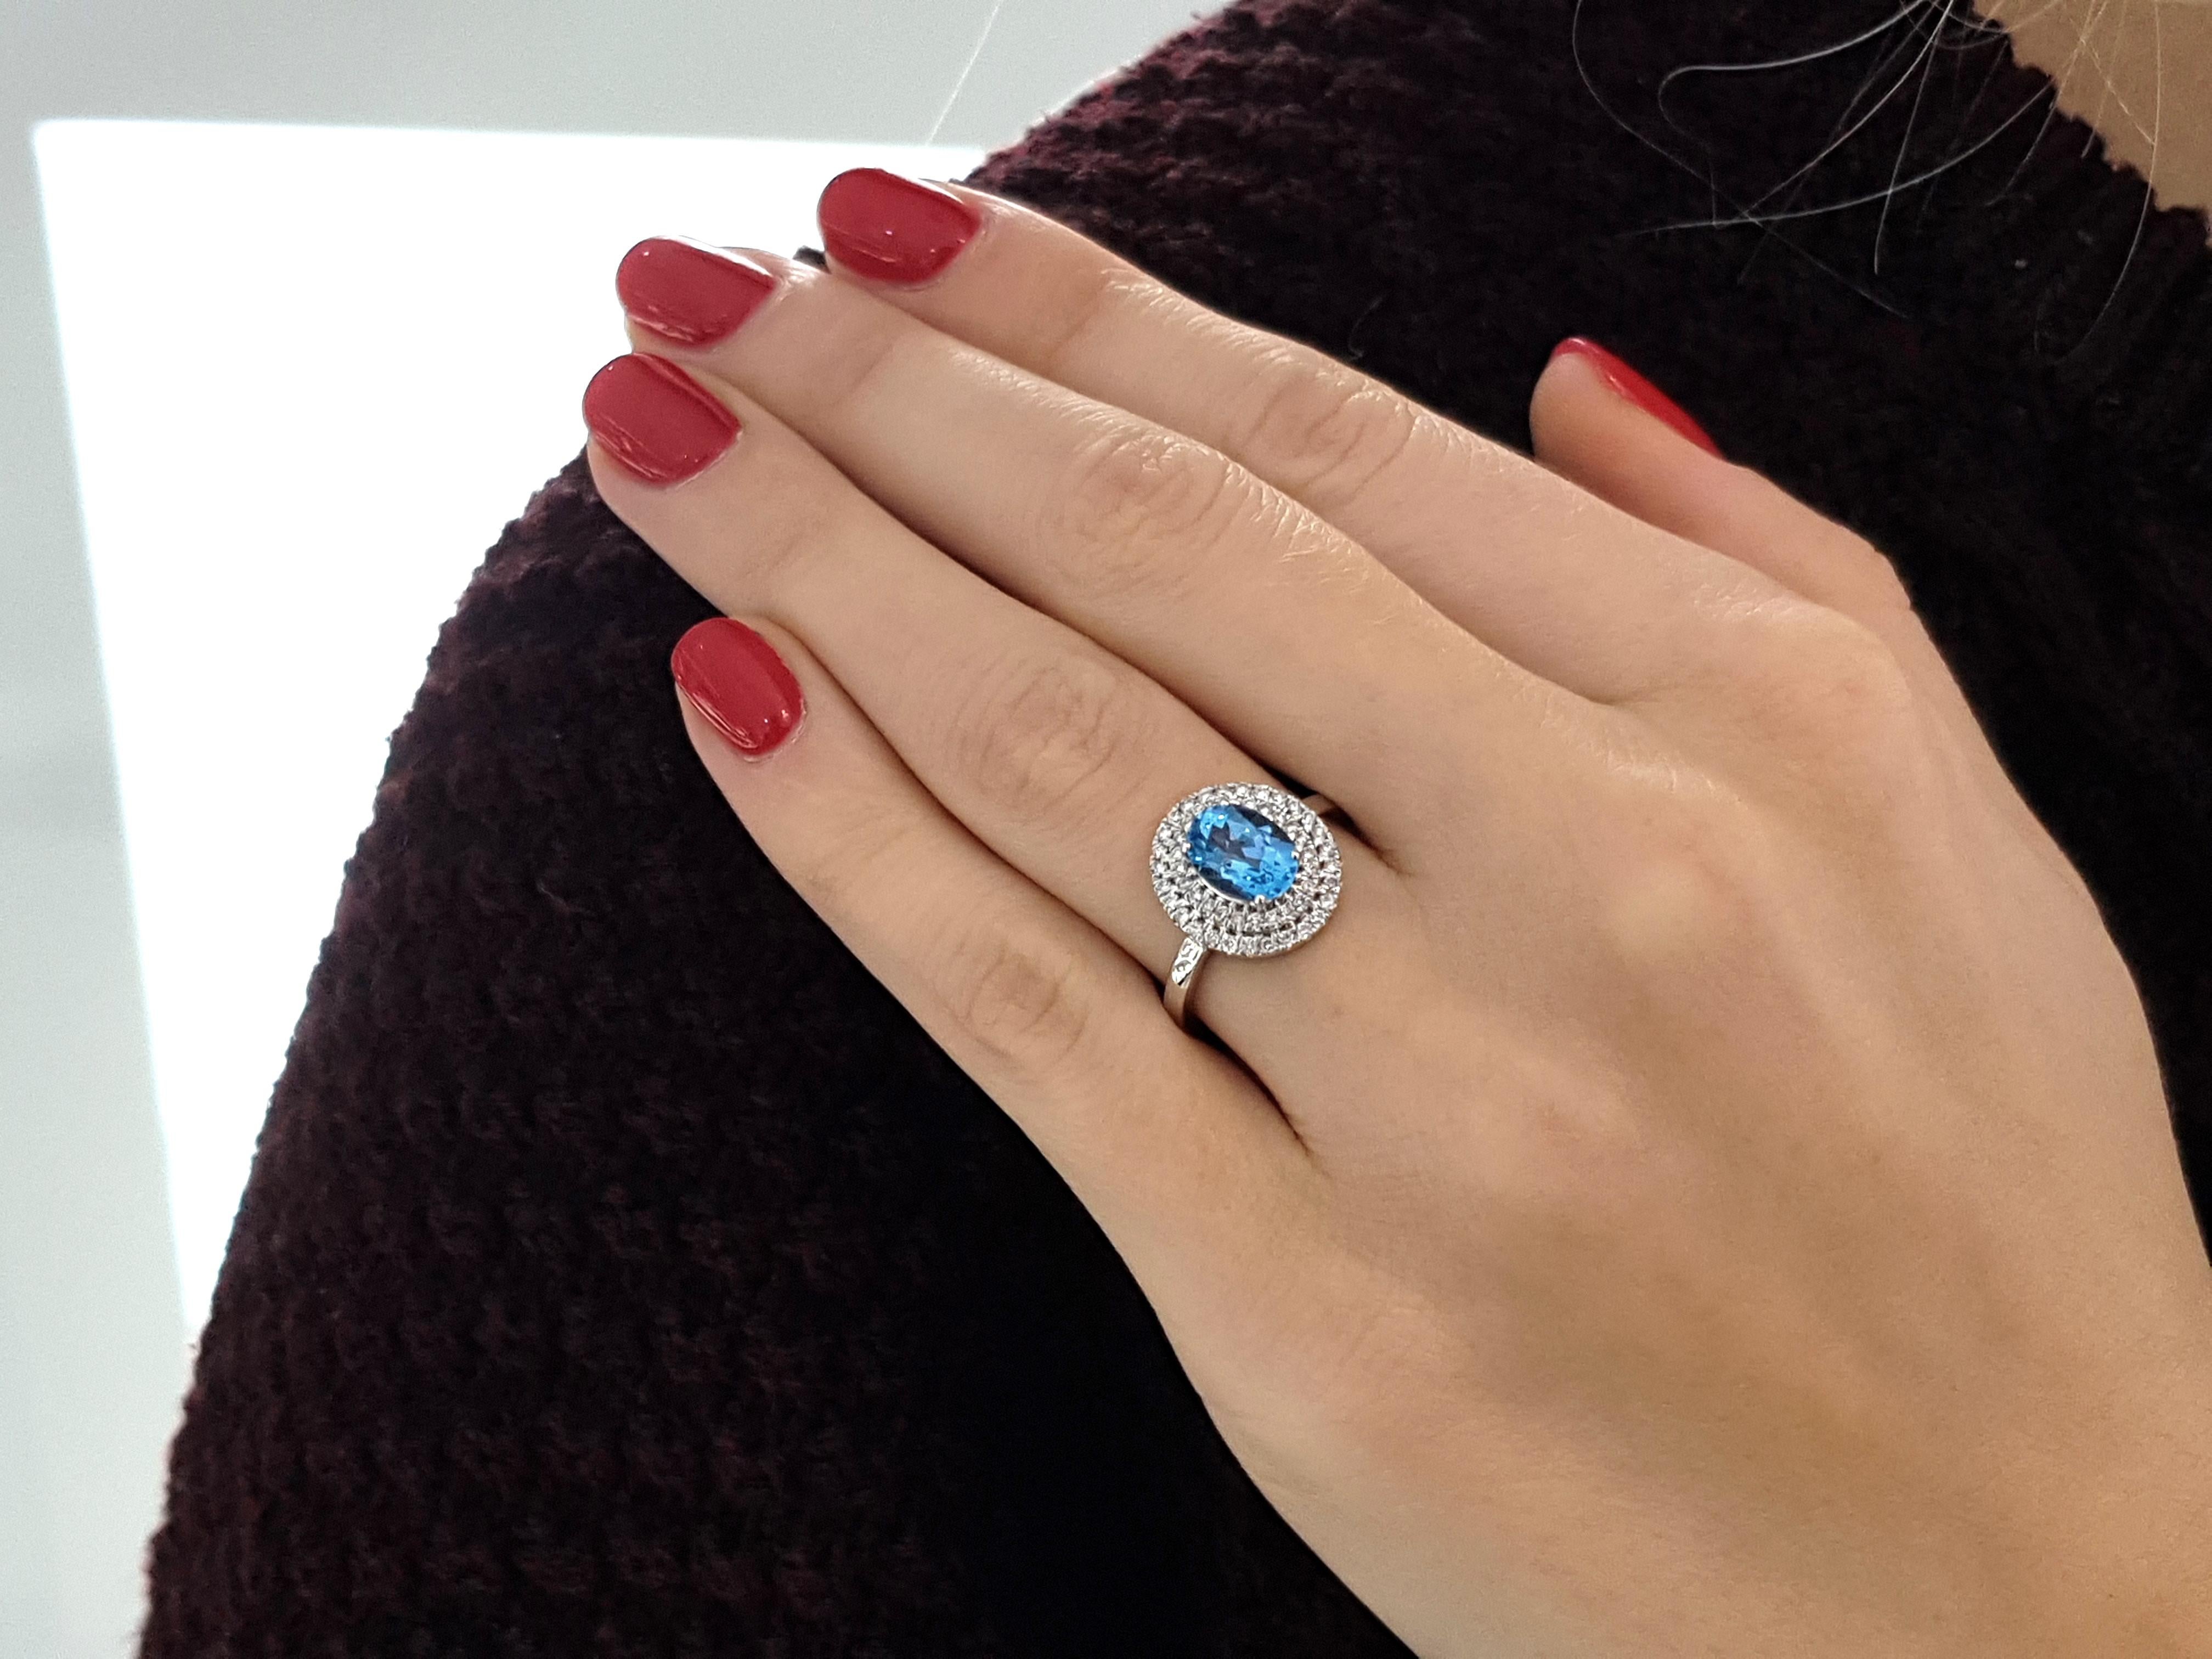 This beautiful 1.70 Carat oval cut Blue Topaz engagement ring surrounded by double halo 0.32 Carat Round White Brilliant Cut Diamonds color H clarity SI1 set in 18 Karat white gold. The ring has a total gem weight of 2.02 Carat. UK size M, US size 6